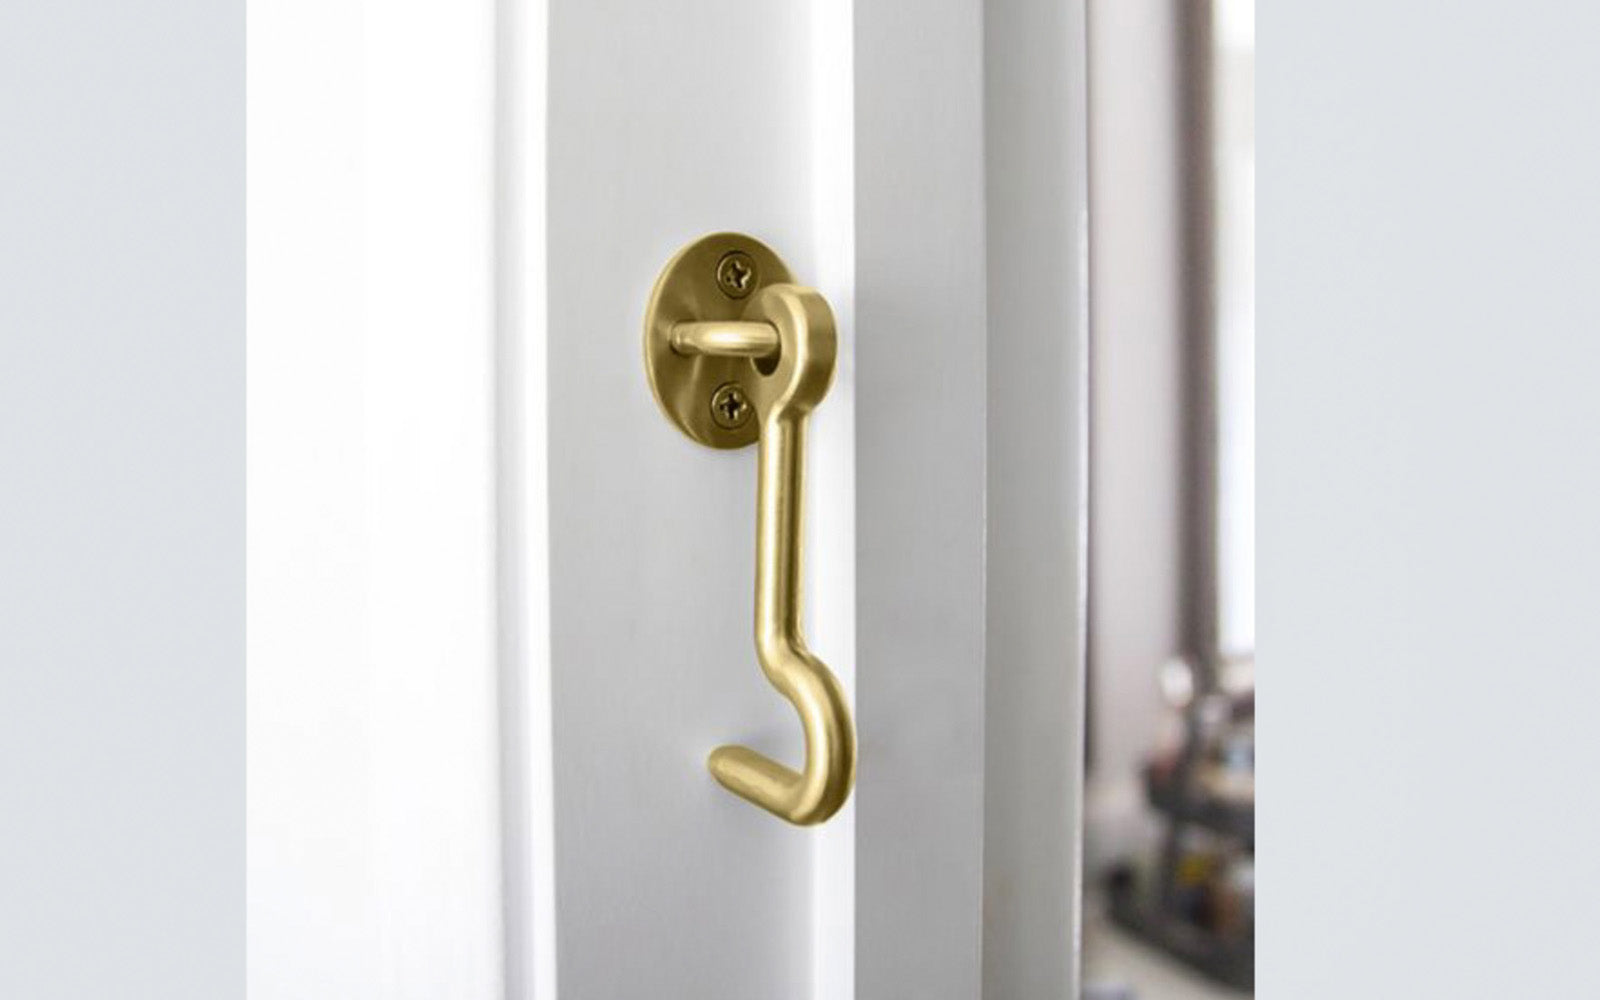 4" Brushed Gold (Brushed Brass) Privacy Hook. Designed for interior barn door hardware. Adds a privacy function to any sliding door hardware door. Includes fasteners. Sold as a single hook and pad. Includes four flat head phillips screws. National Hardware model N700-154. 886780028195